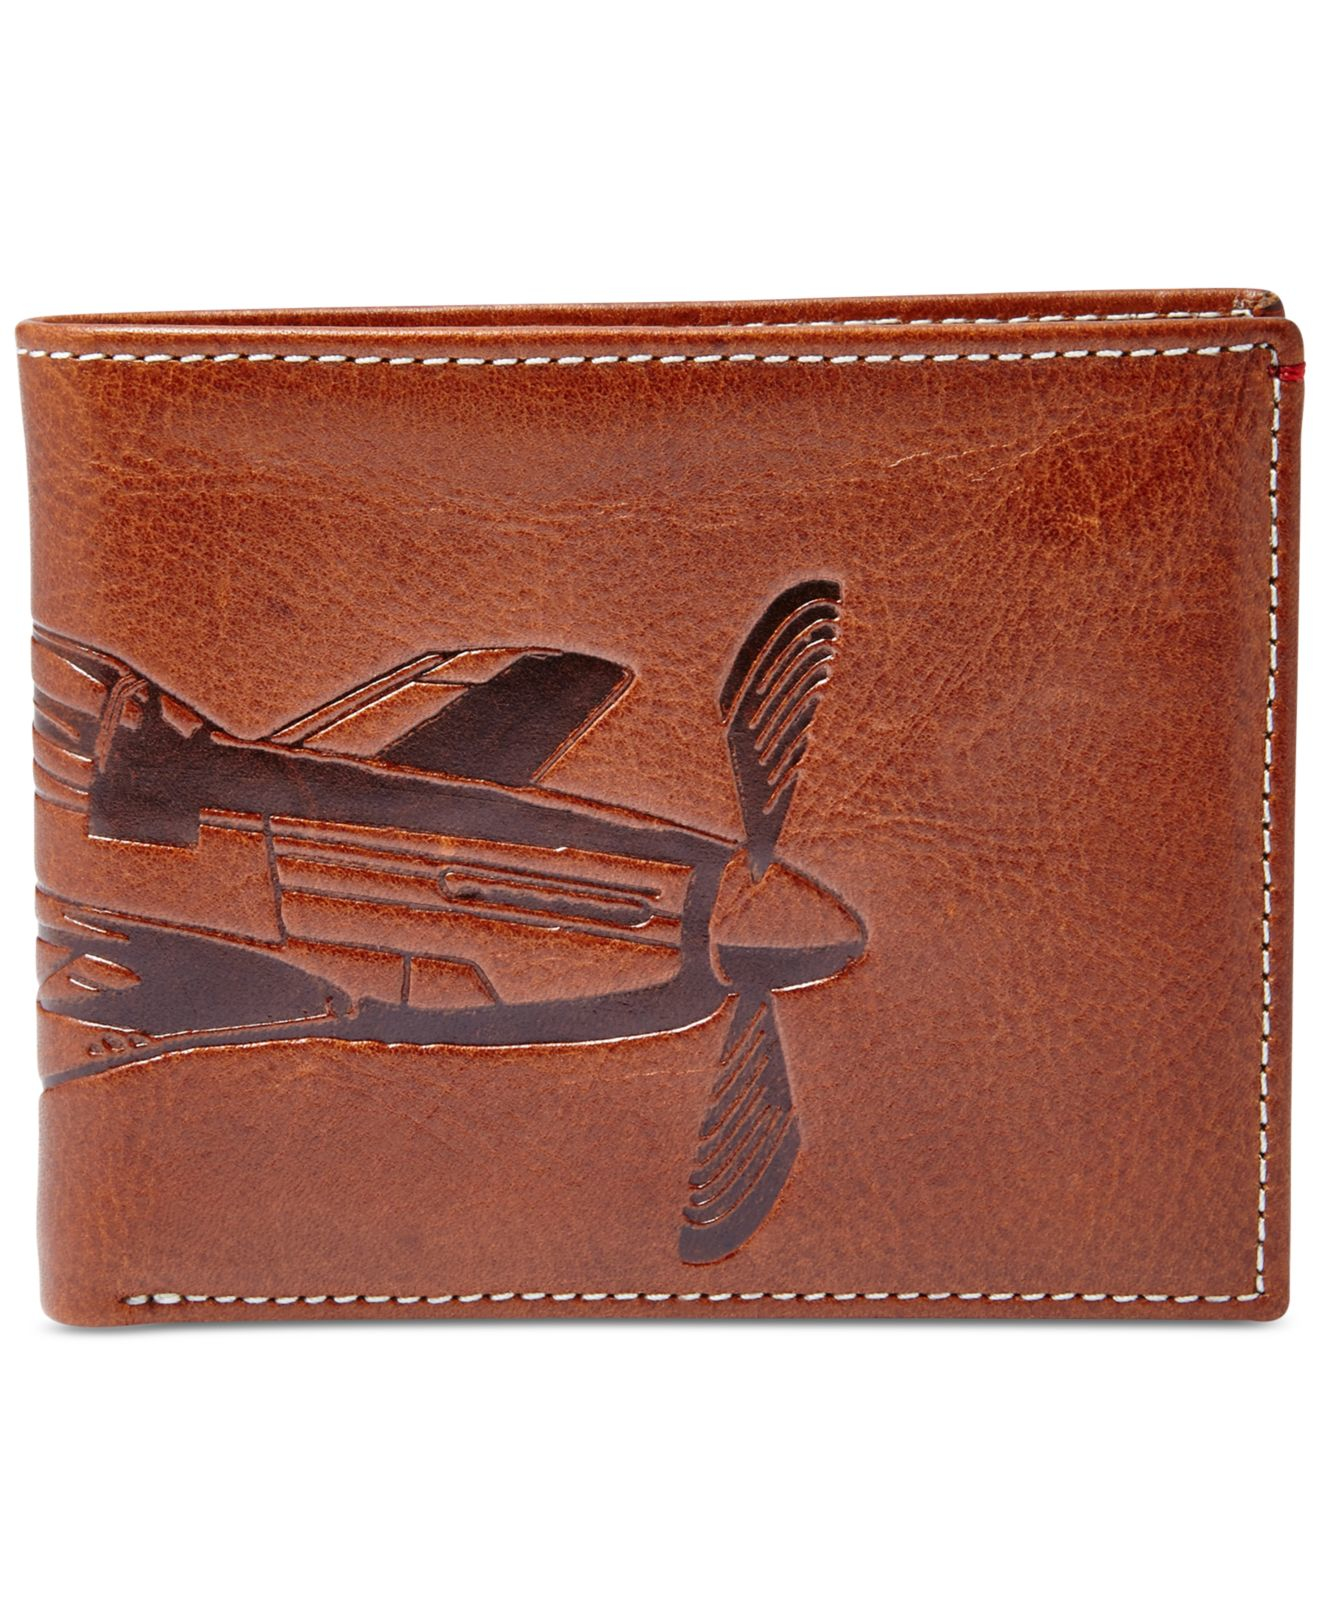 Fossil Danny Leather Zip Bifold Wallet in Brown for Men | Lyst